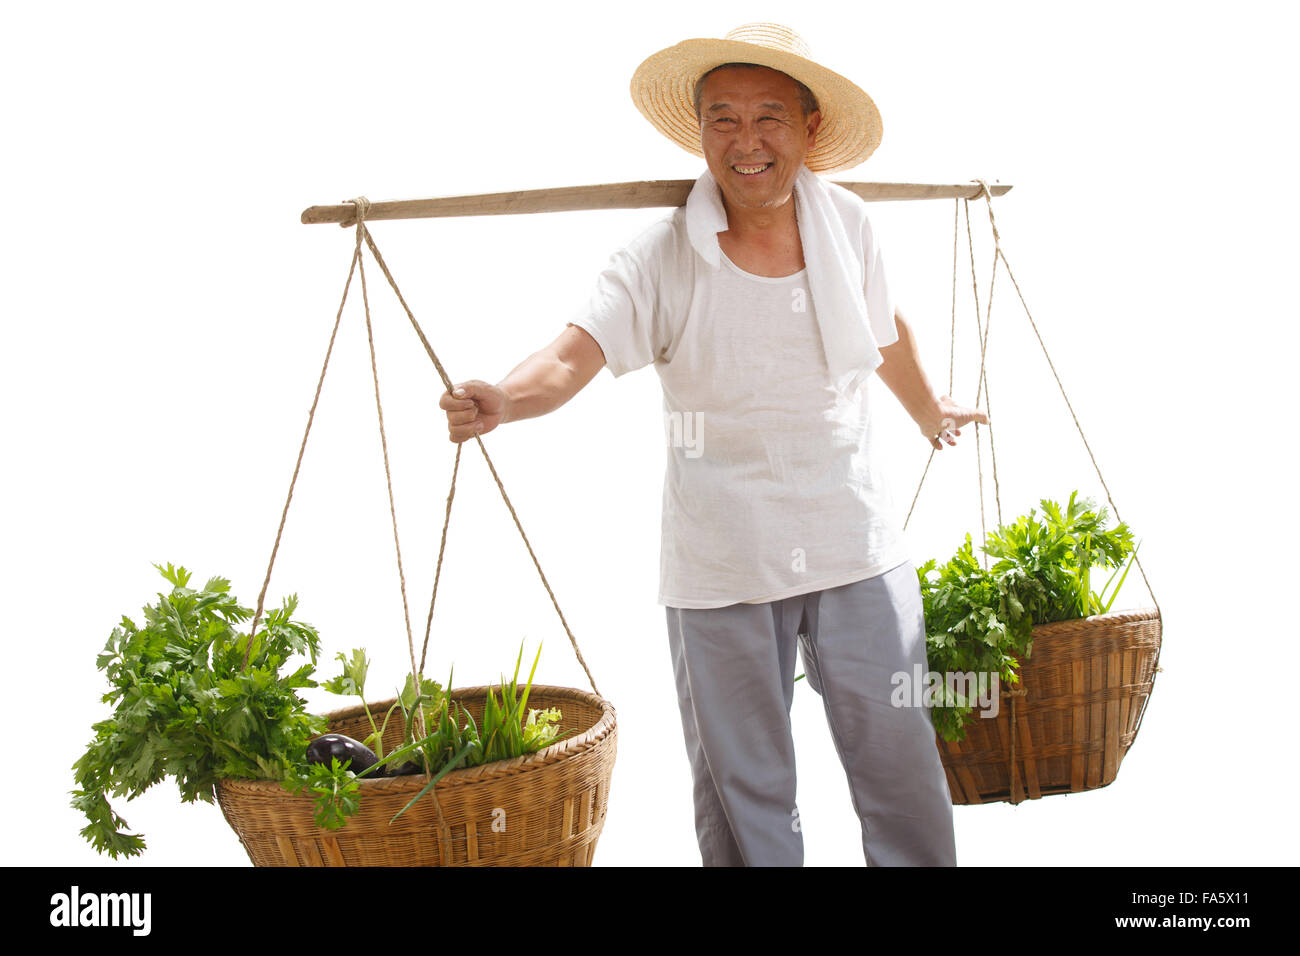 Farmers picking vegetables Stock Photo